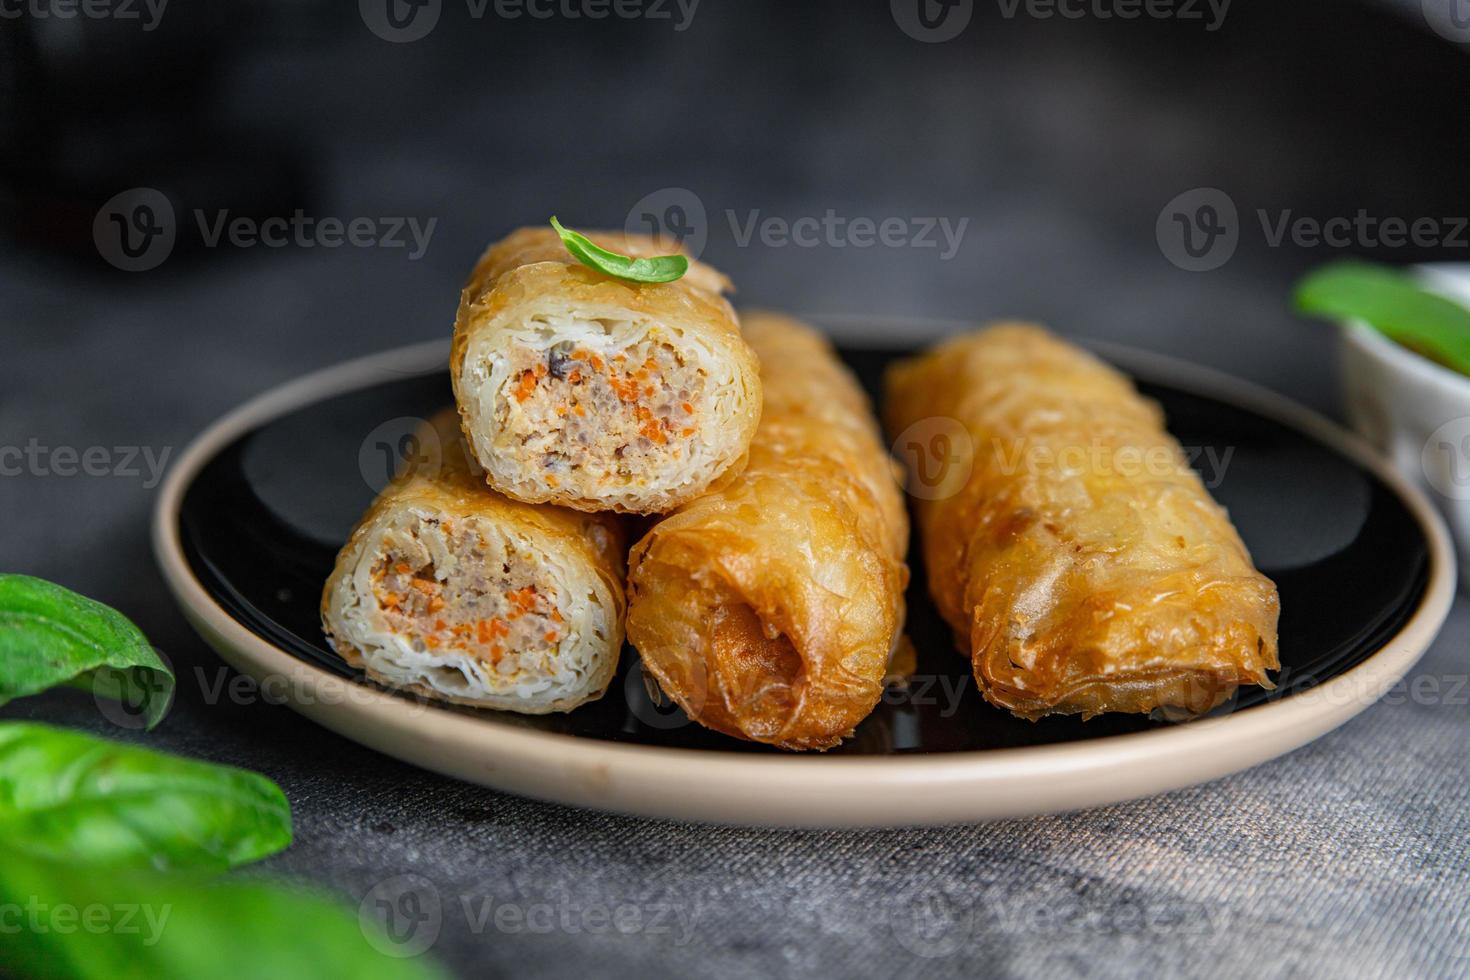 Nem food meat vegetable nems spicy sauce cuisine deep fried spring rolls fresh meal on the table copy space food background photo